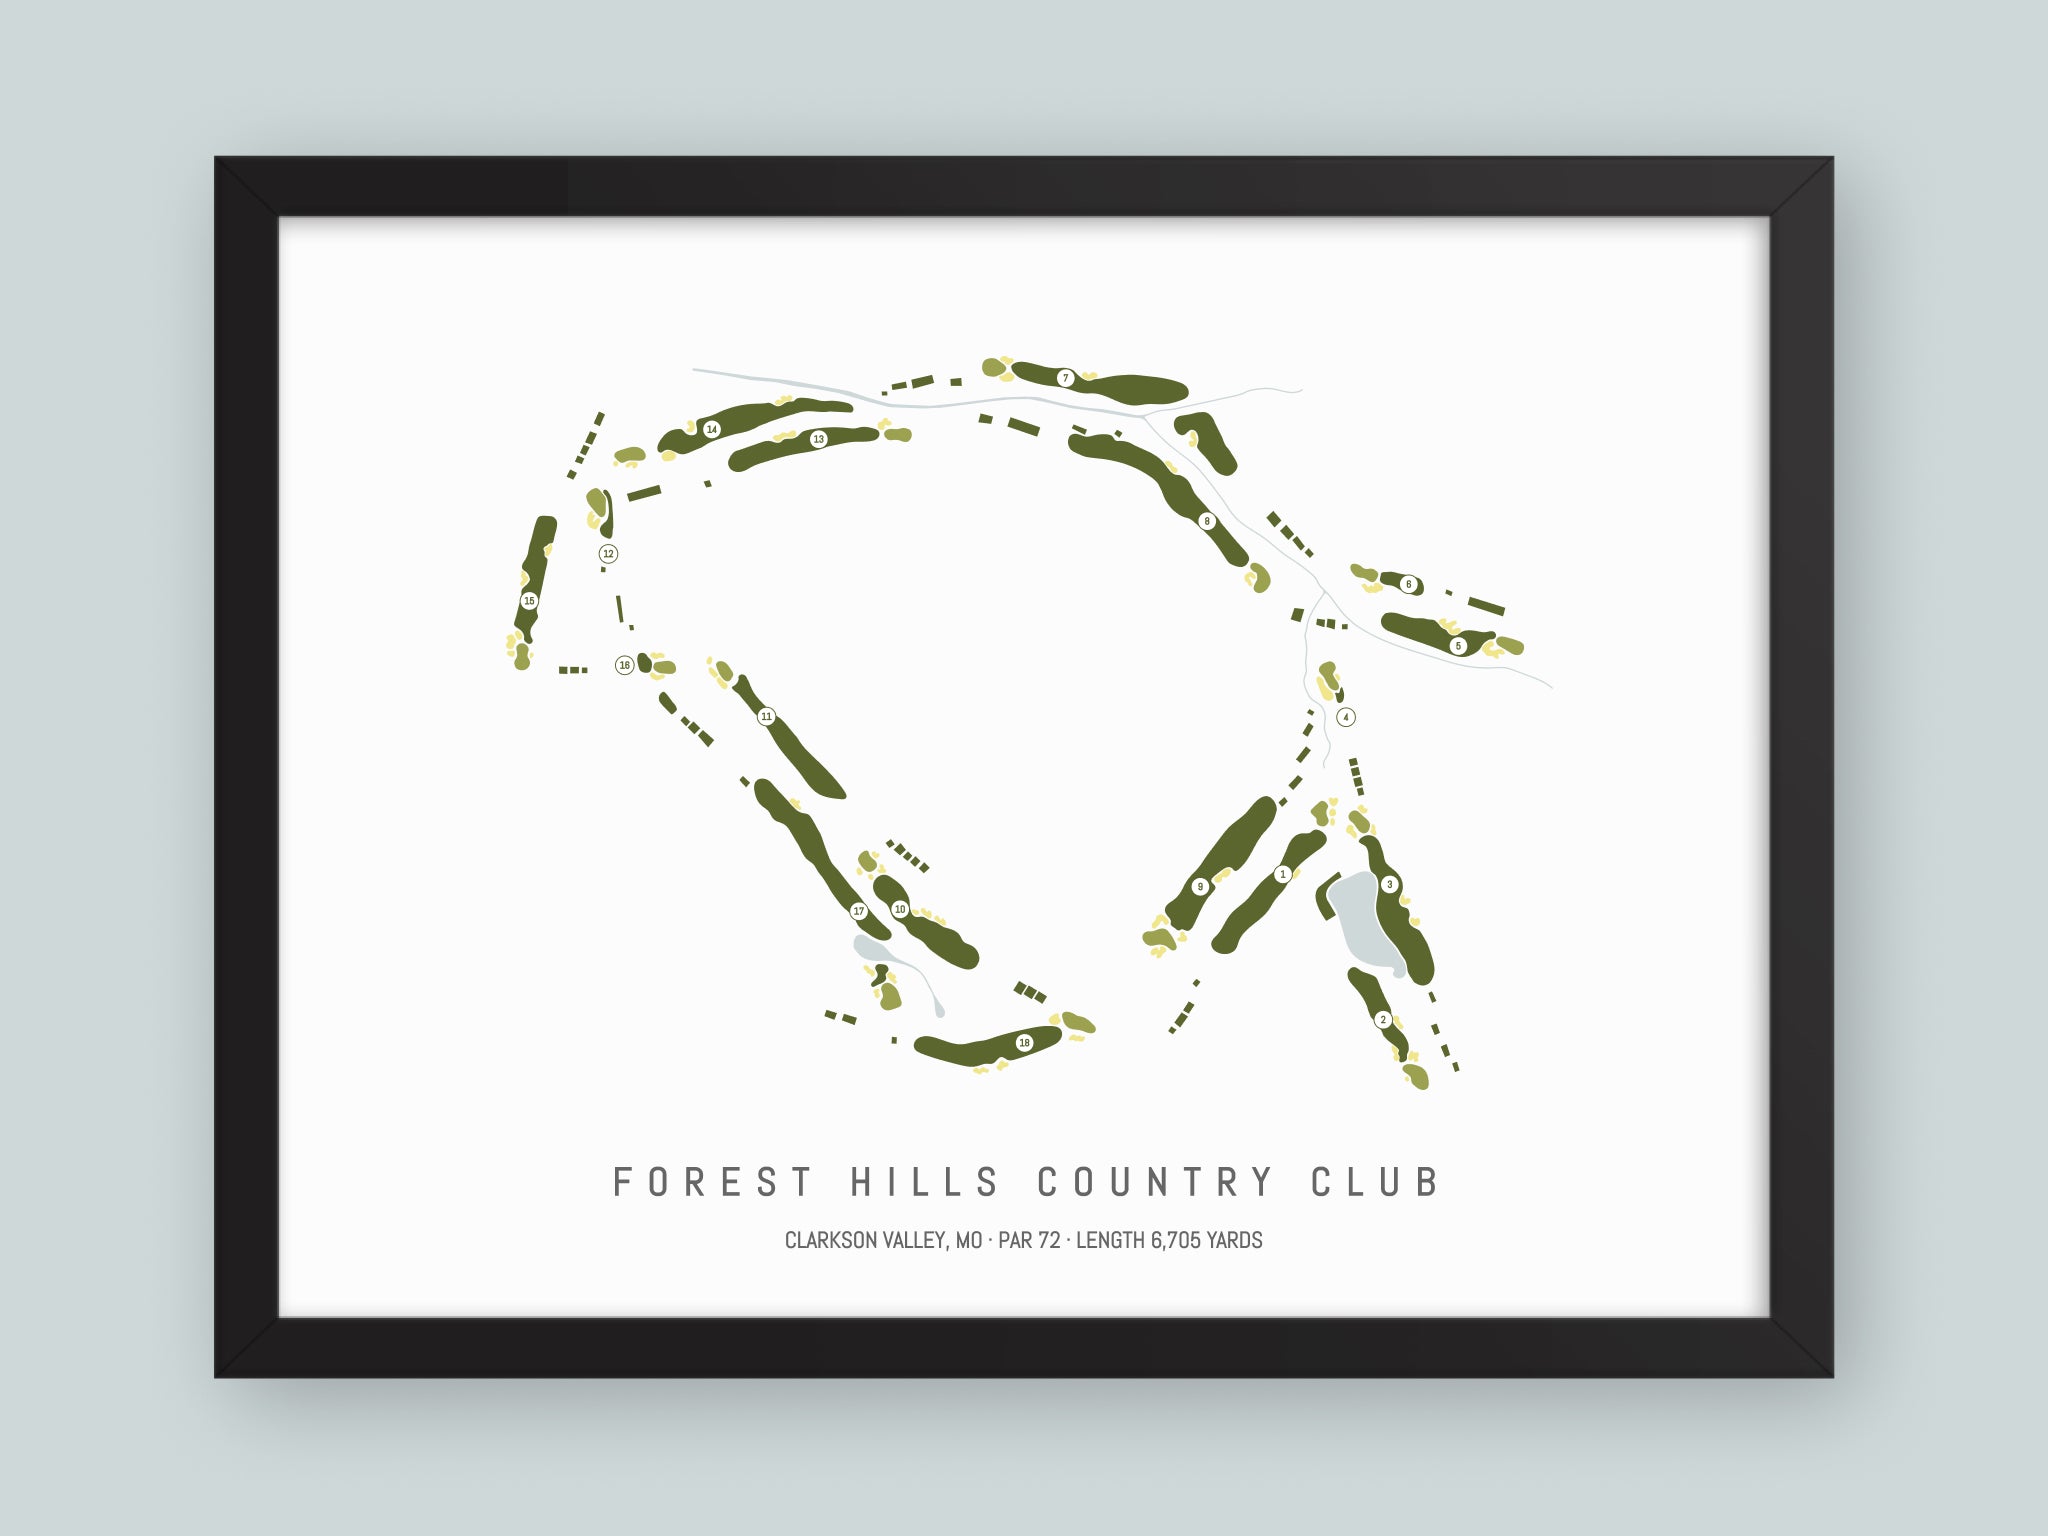 Forest-Hills-Country-Club-MO--Black-Frame-24x18-With-Hole-Numbers